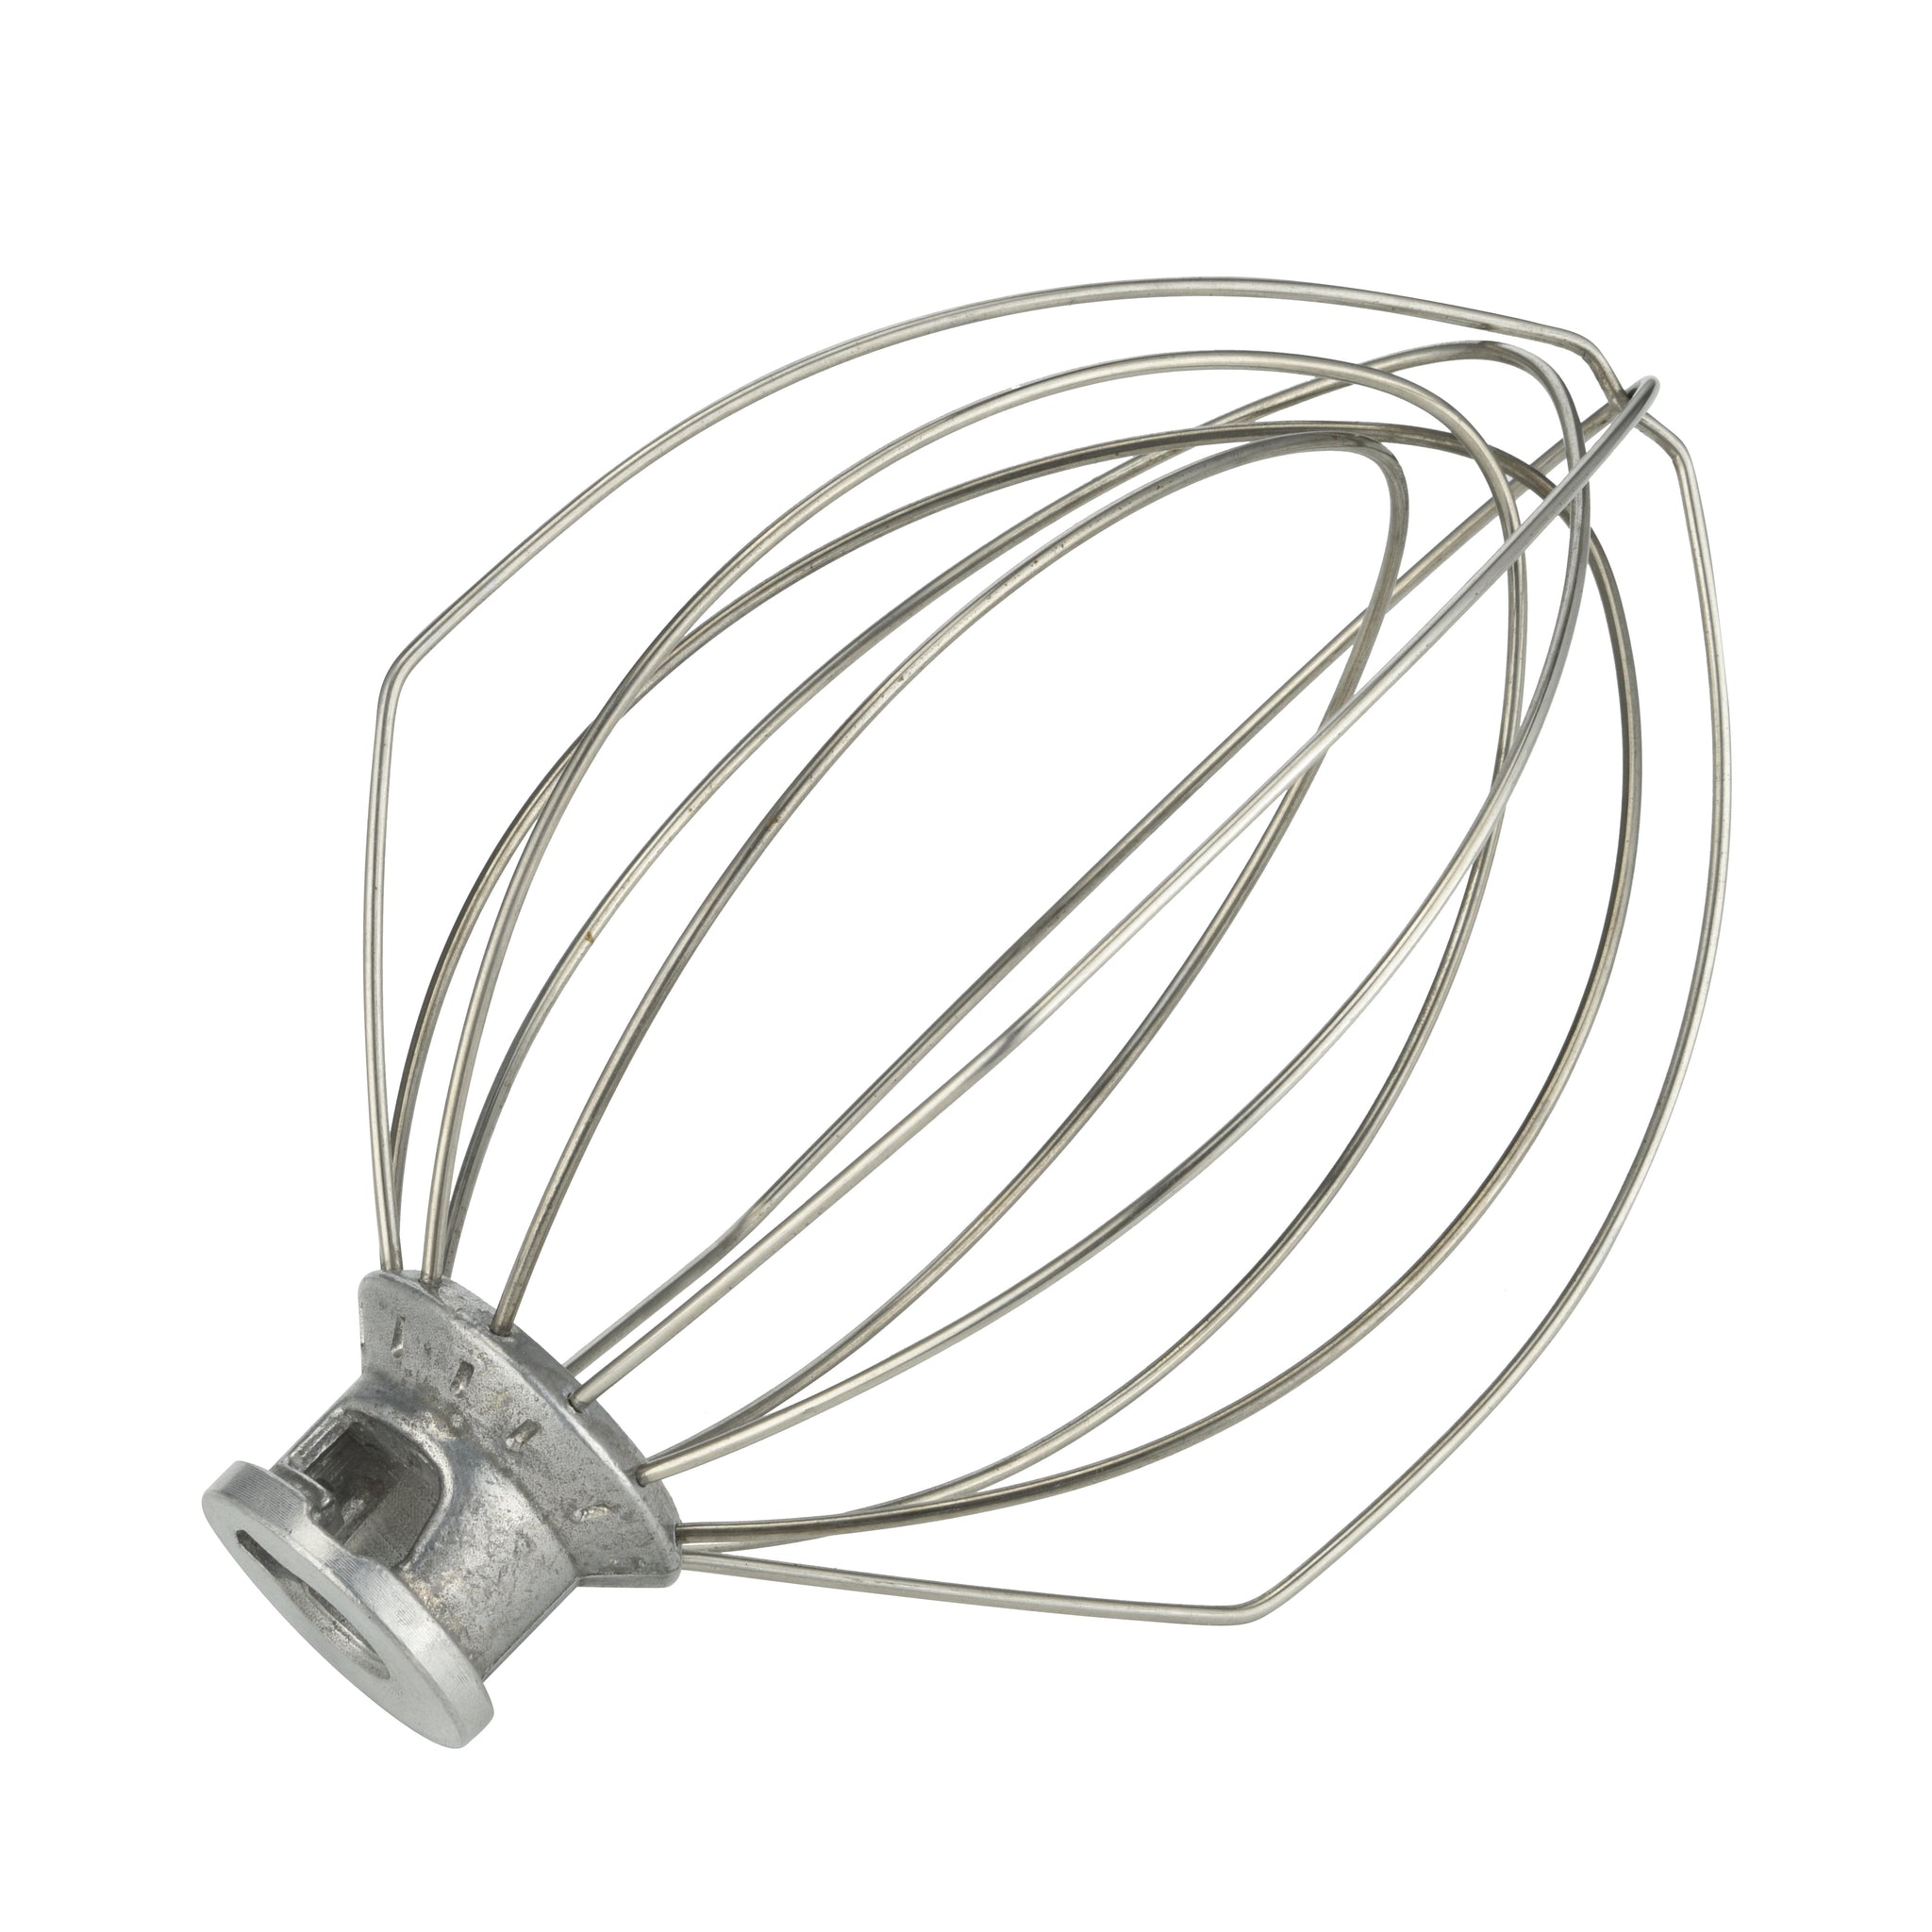 Stand Mixer, 4.5 QT Wire Whip, for KitchenAid, K45WW, 9704329